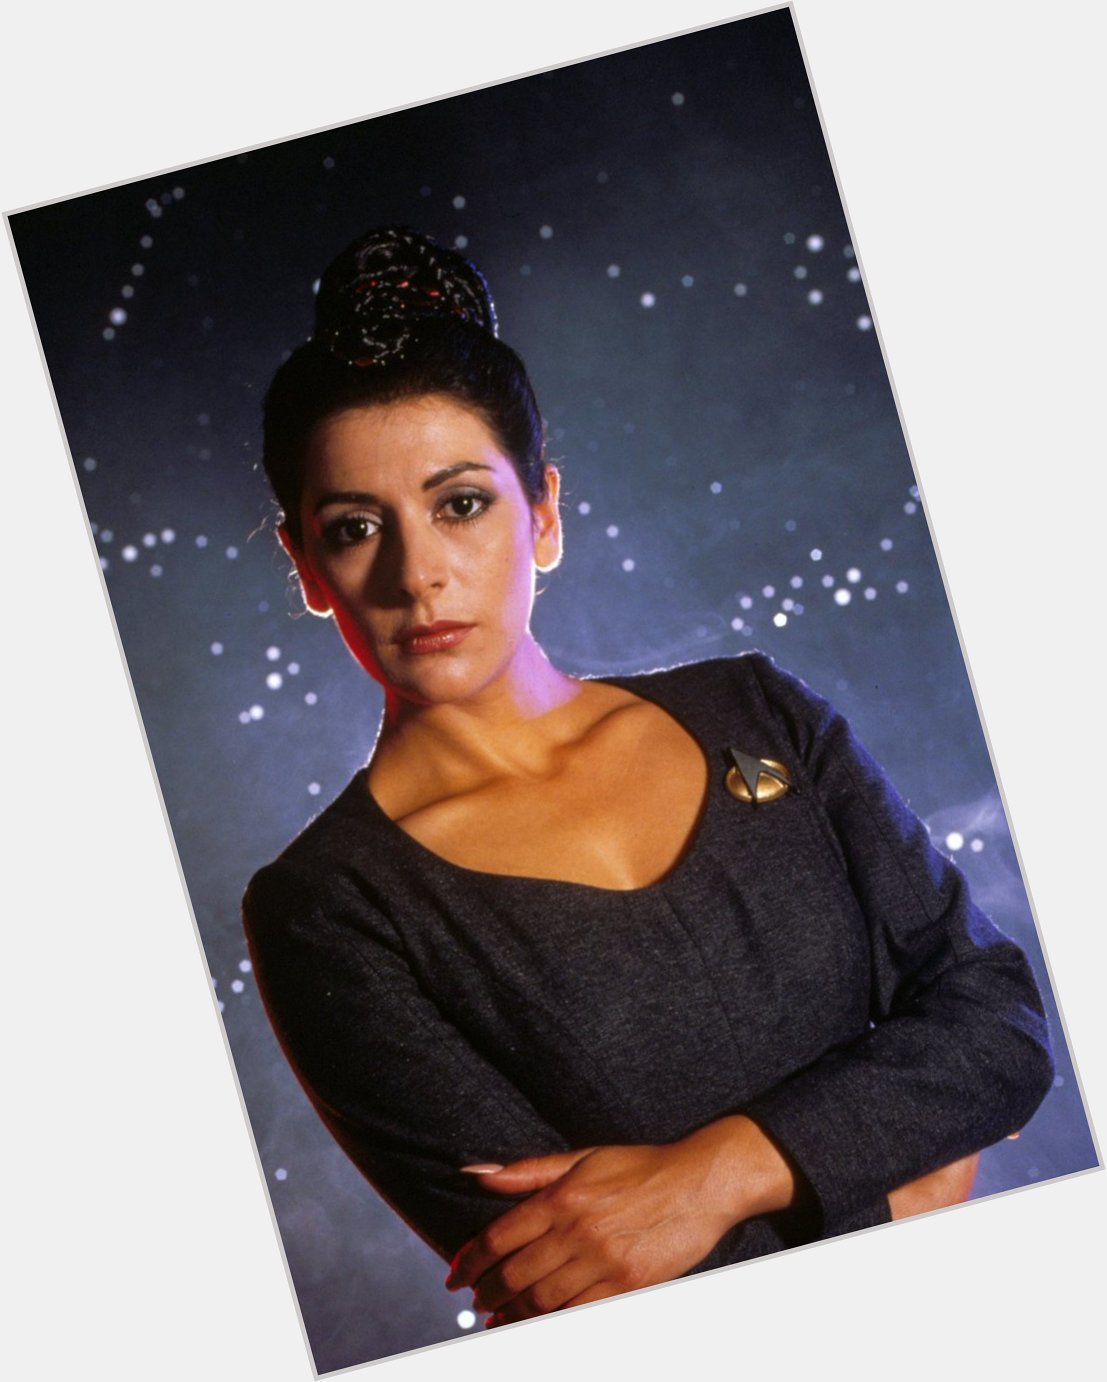  happy birthday to you and I love counselor Deanna Troi. 